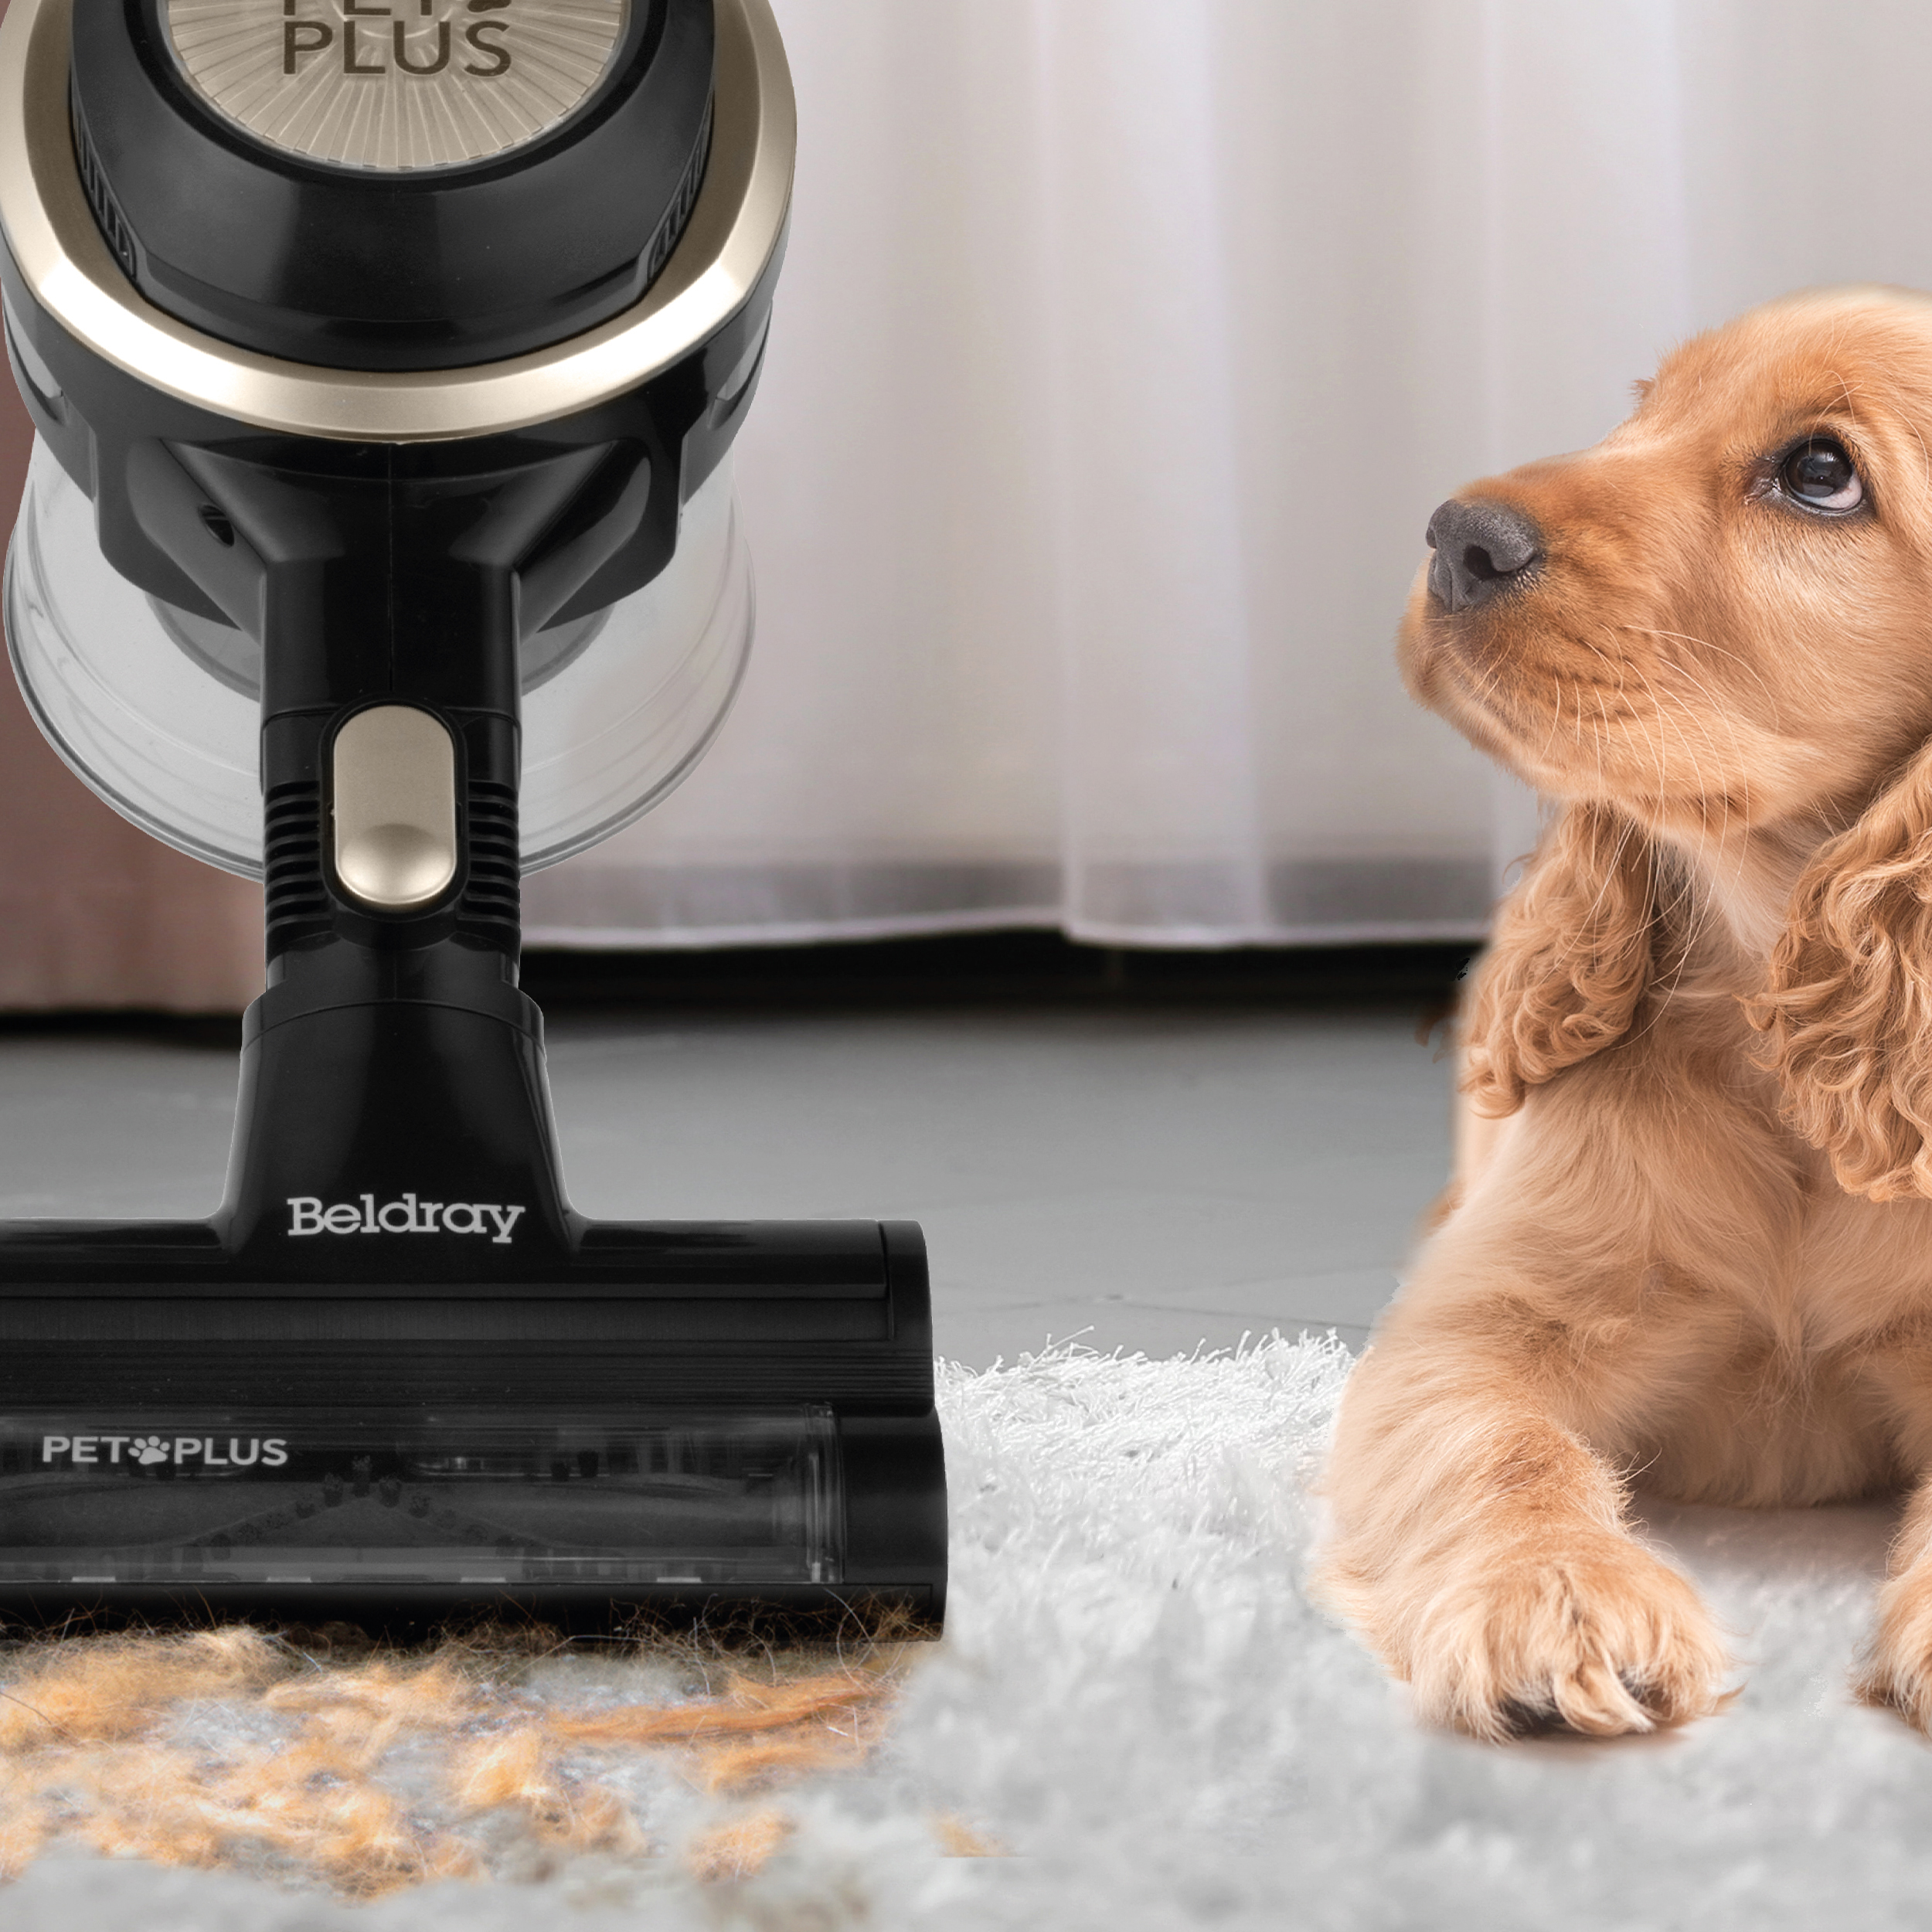 Beldray Airgility Pet Plus vacuum cleaning up dog fur